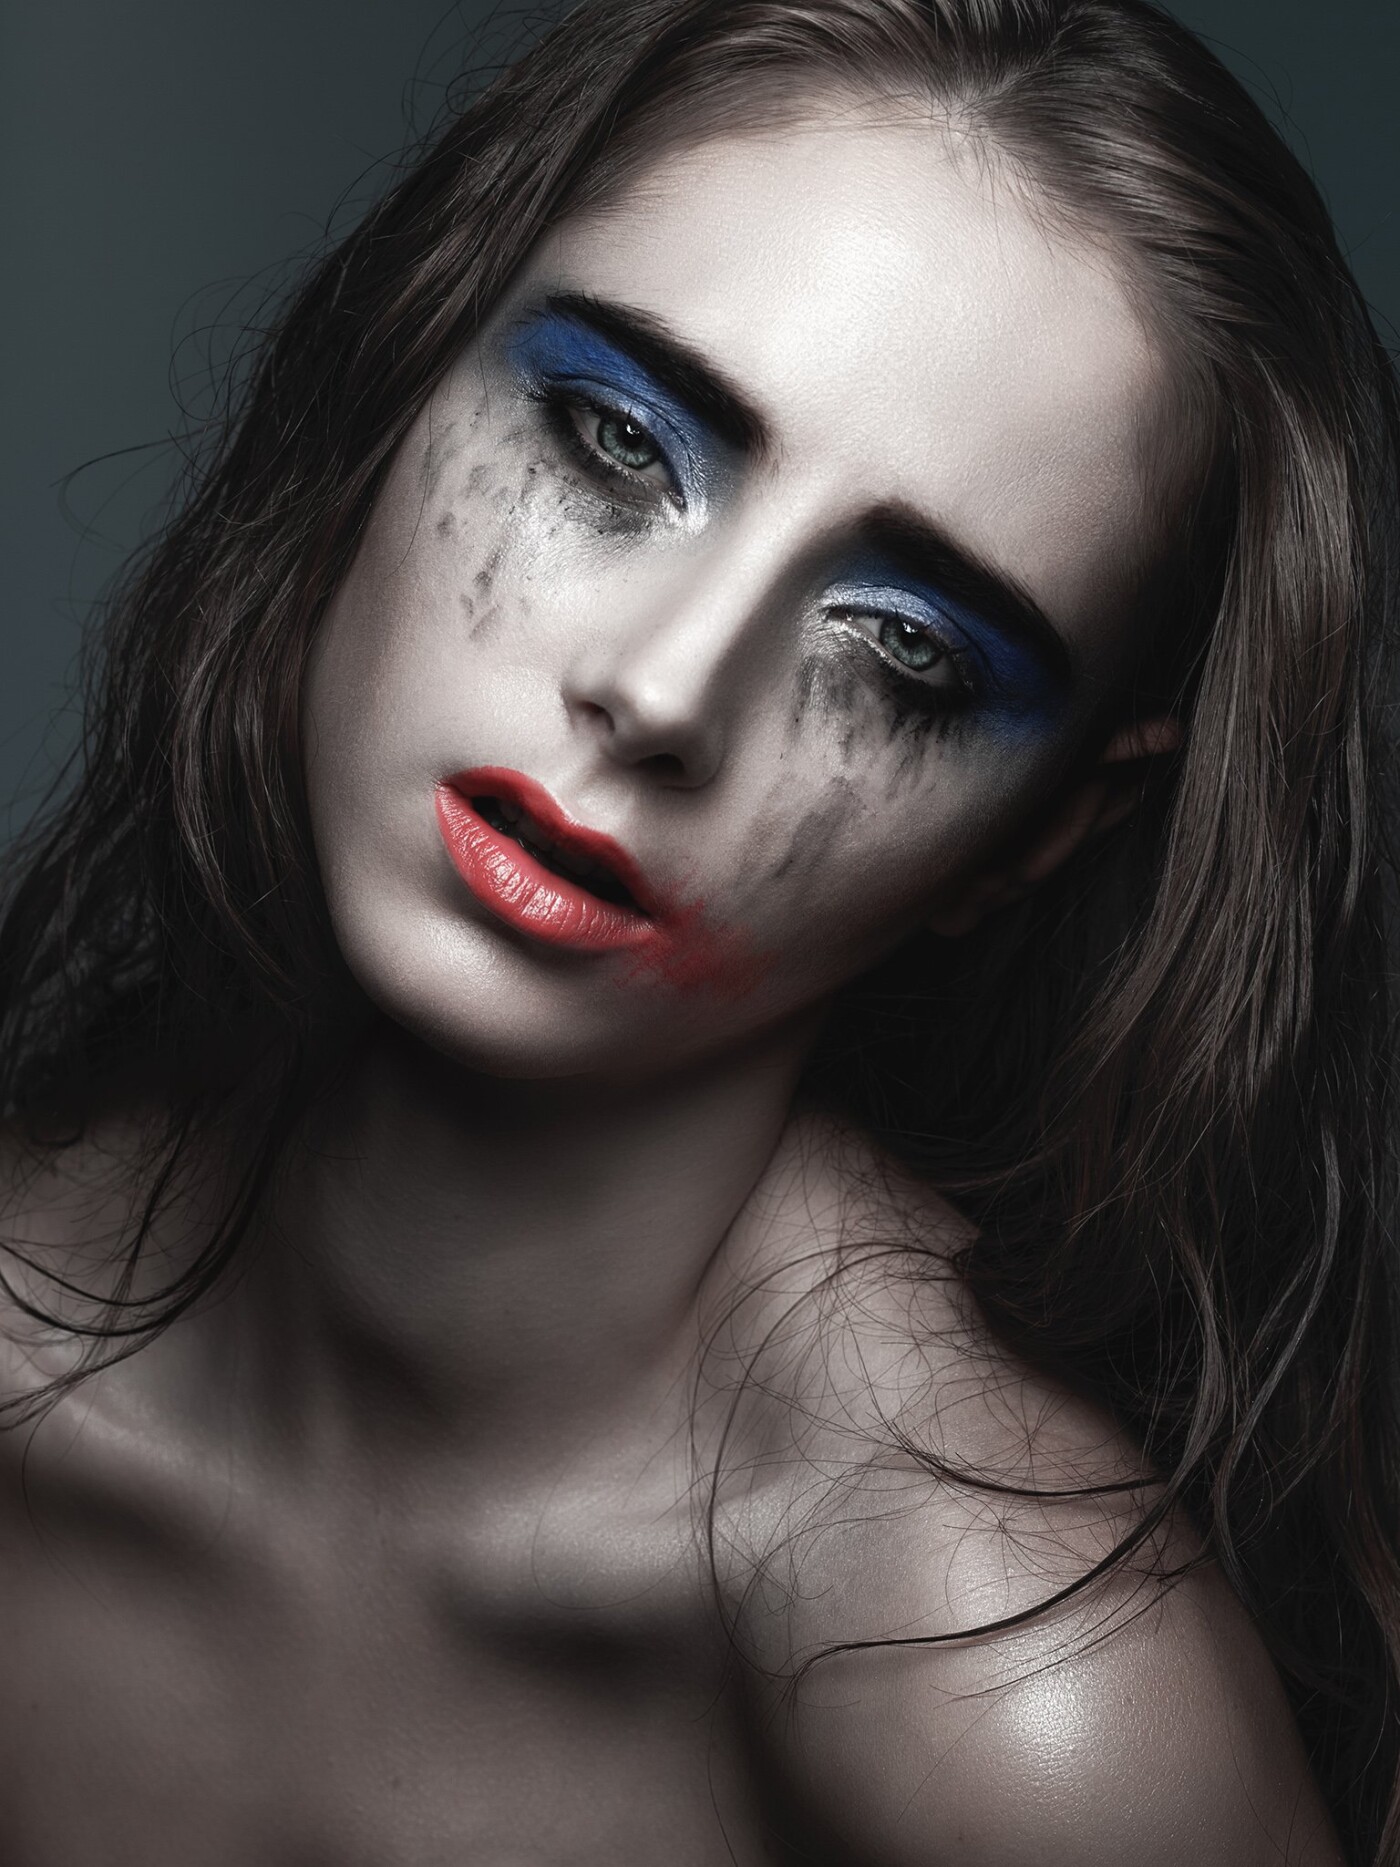 A concept art portrait called "The Weeper" while creating high-fashion in Milano. PS toning took the creative makeup an extra step by creating a pale desaturated skin while enhancing the makeup effect. 